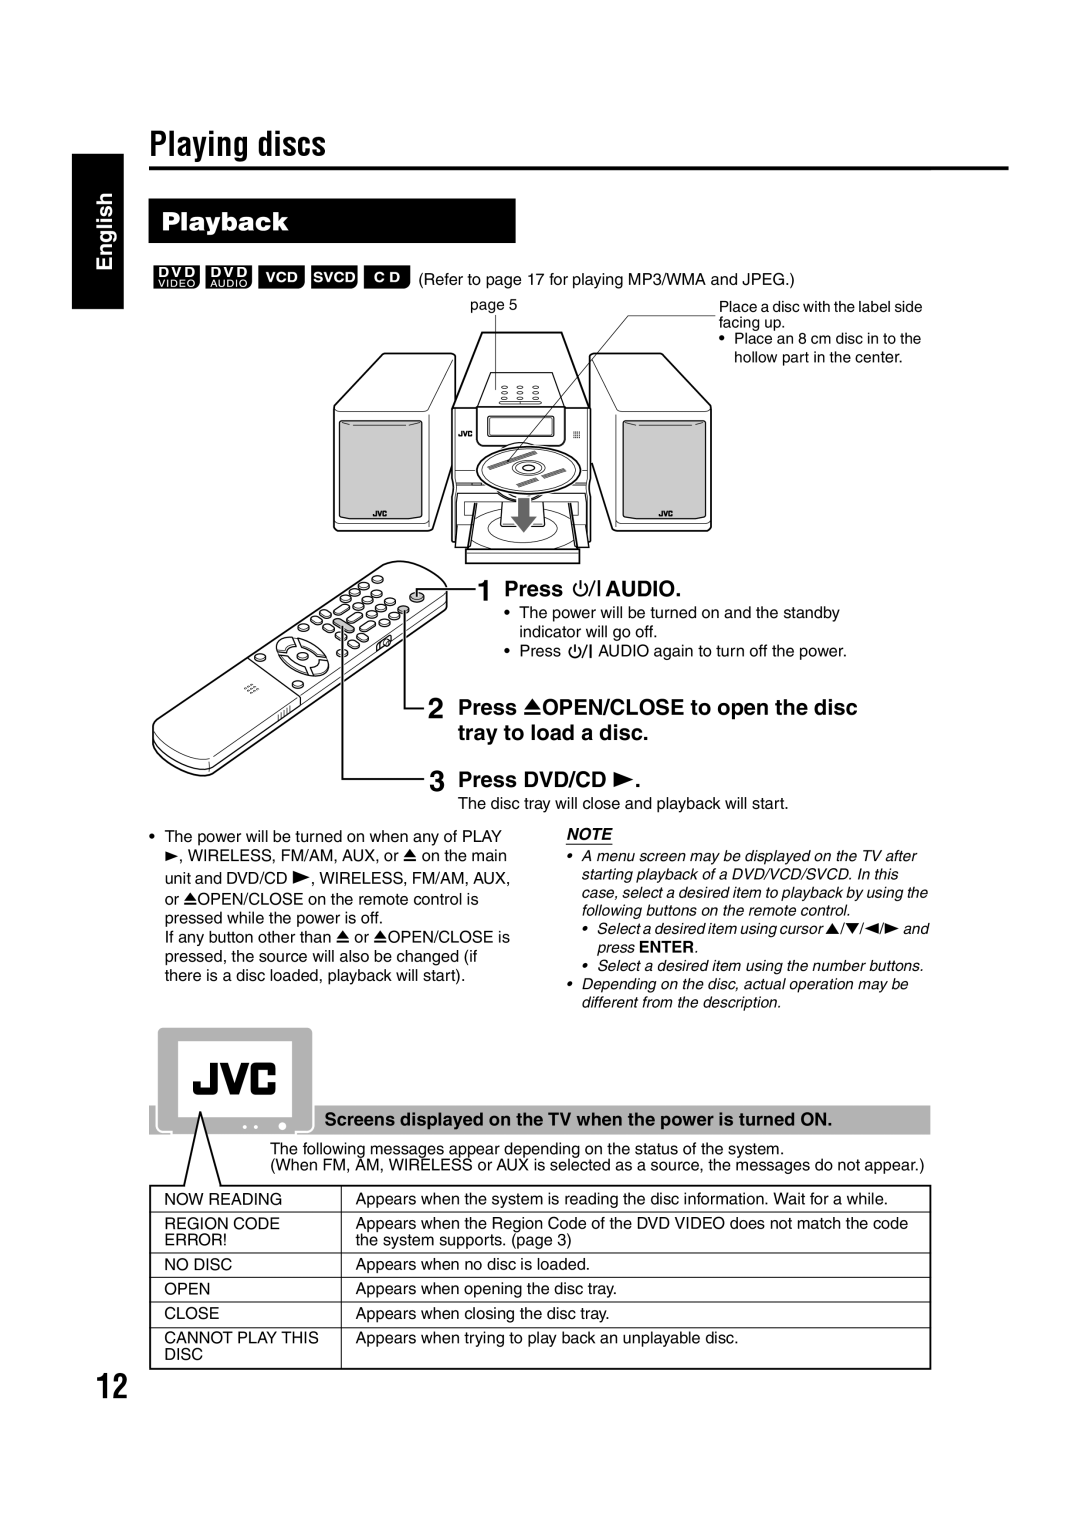 JVC GVT0144-005A Playing discs, Playback, English, Audio, Press 0OPEN/CLOSE to open the disc, tray to load a disc 